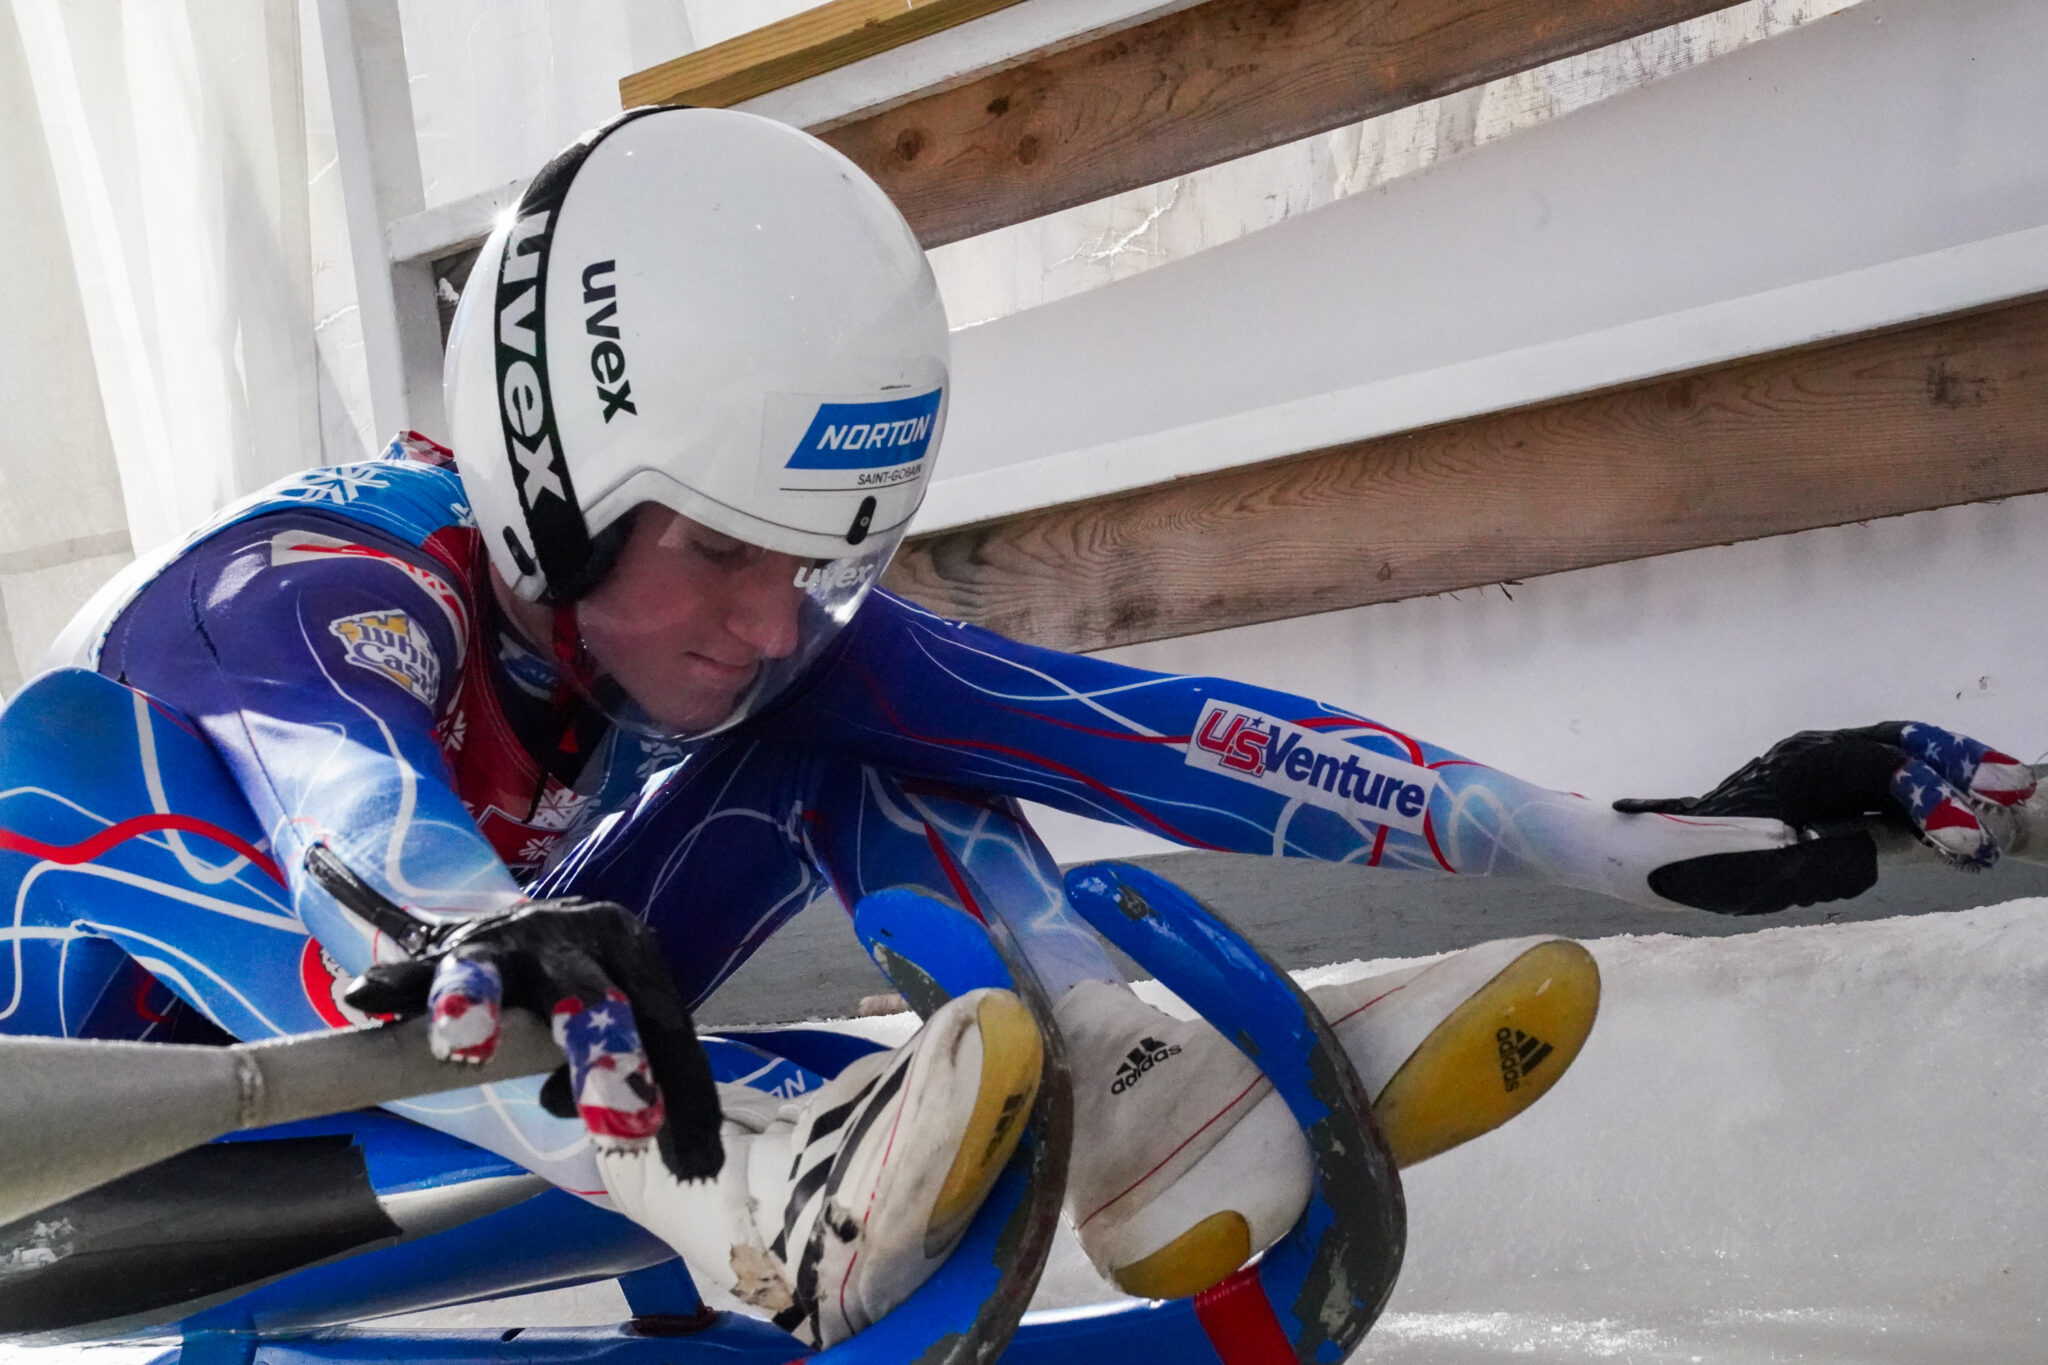 A luge racer prepares to head down a track